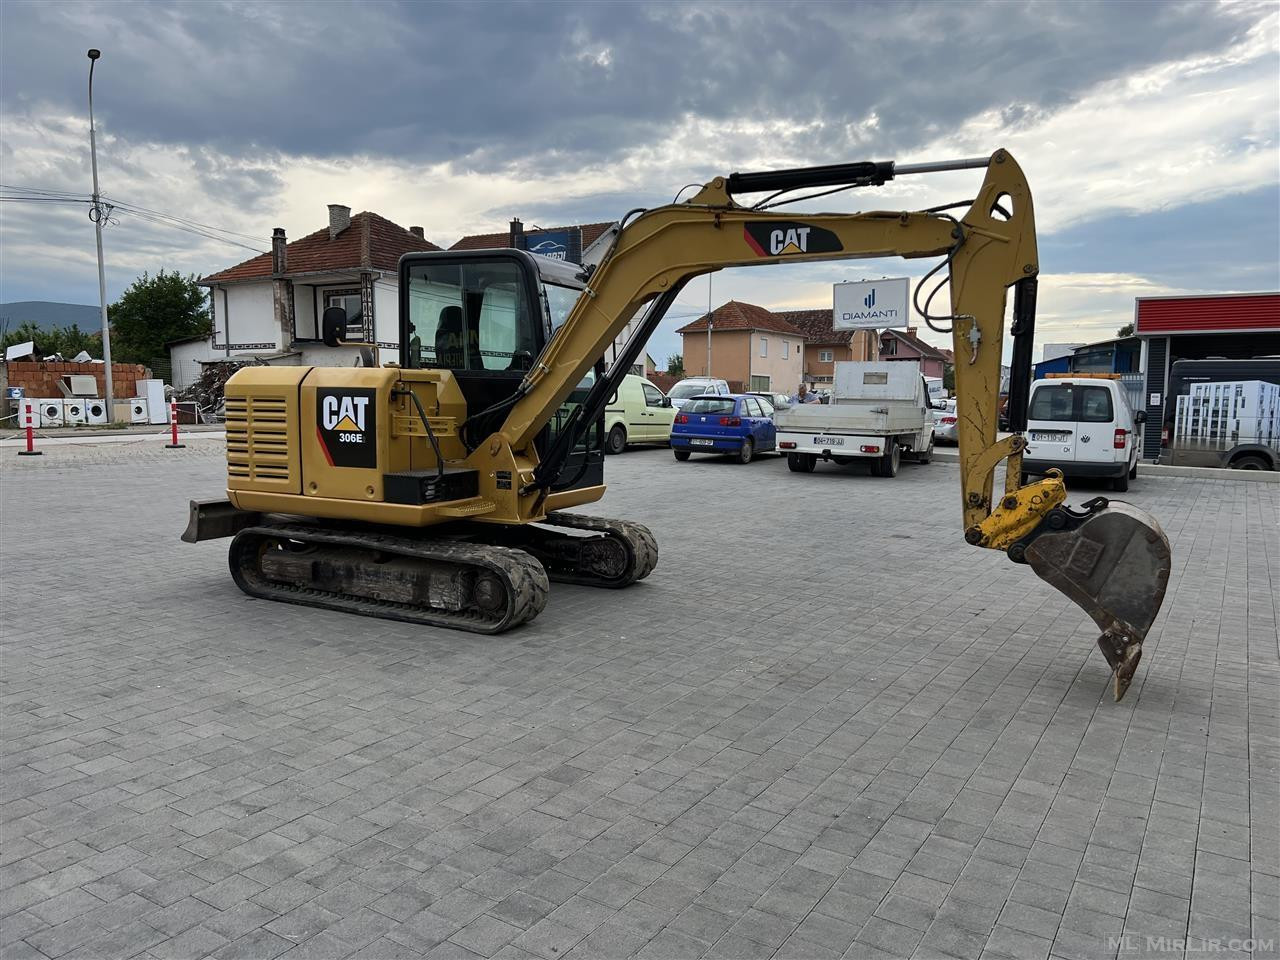 Shes Bagerin cat 306 E